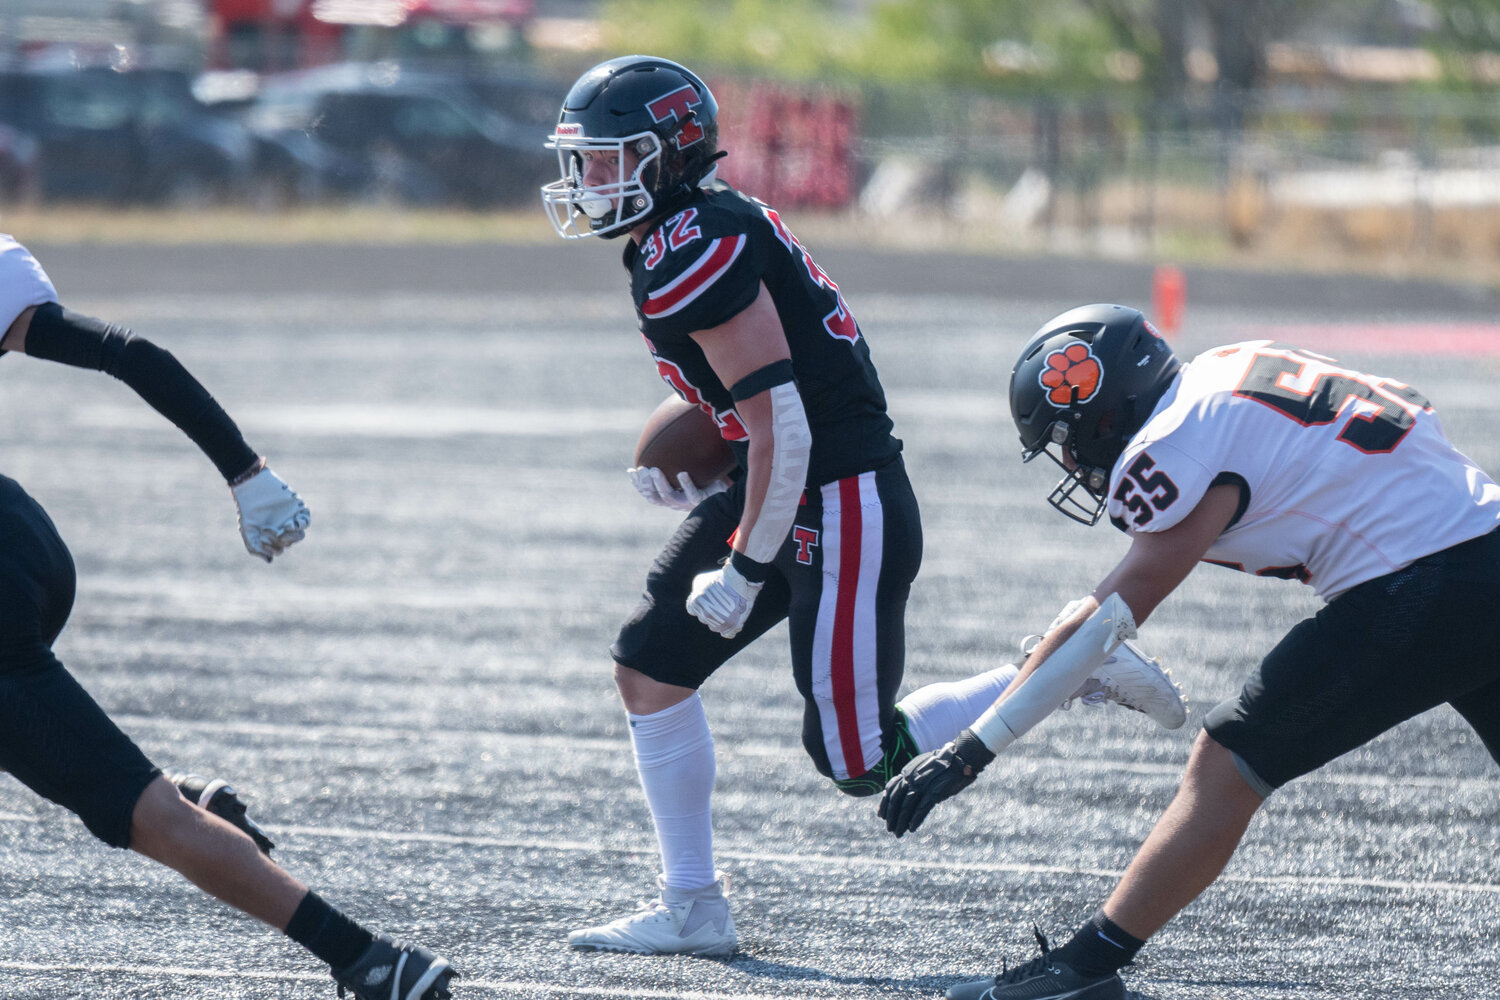 Mikey Vassar takes a handoff in the first quarter of Tenino's 34-32 loss to Zillah on Sept. 9.